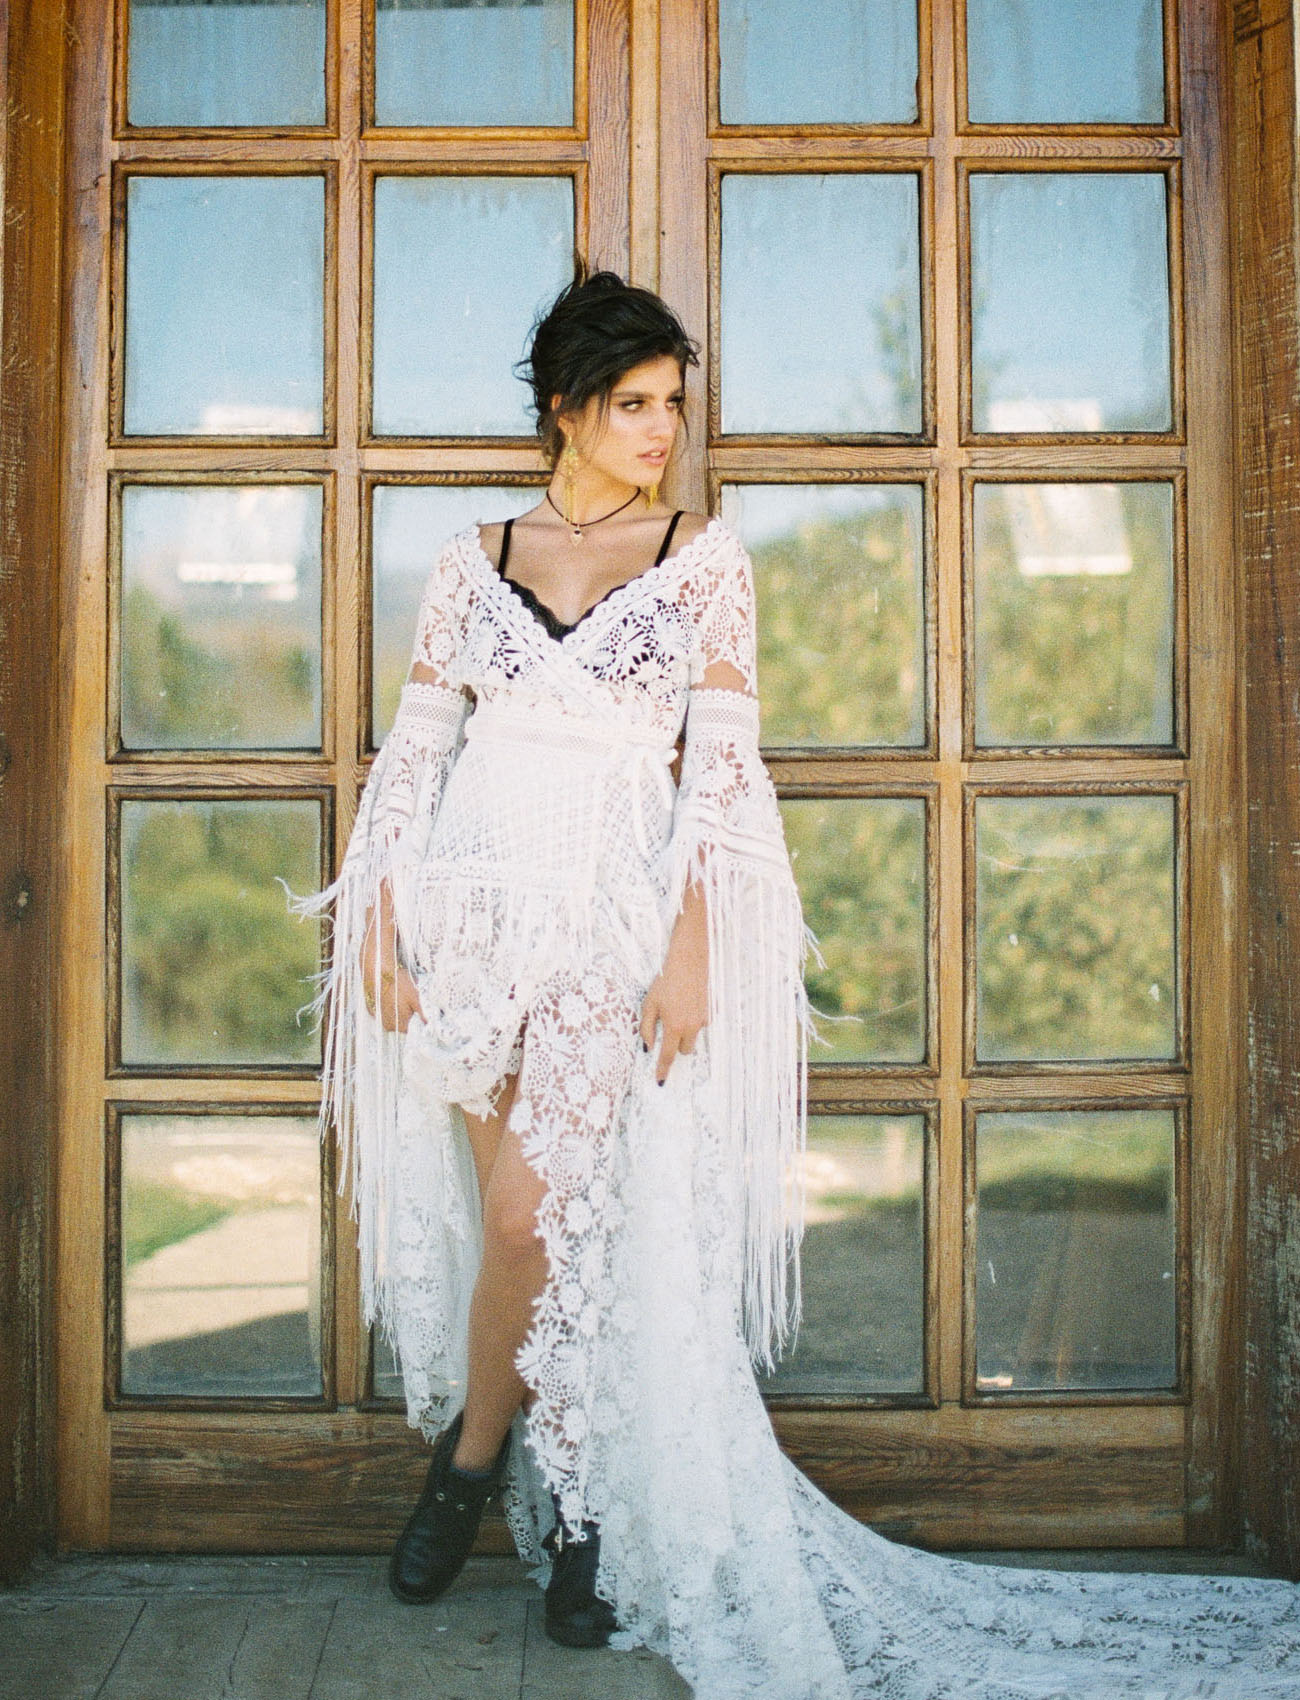 The bride was wearing a boho lace high low wedding dress with a train and black booties